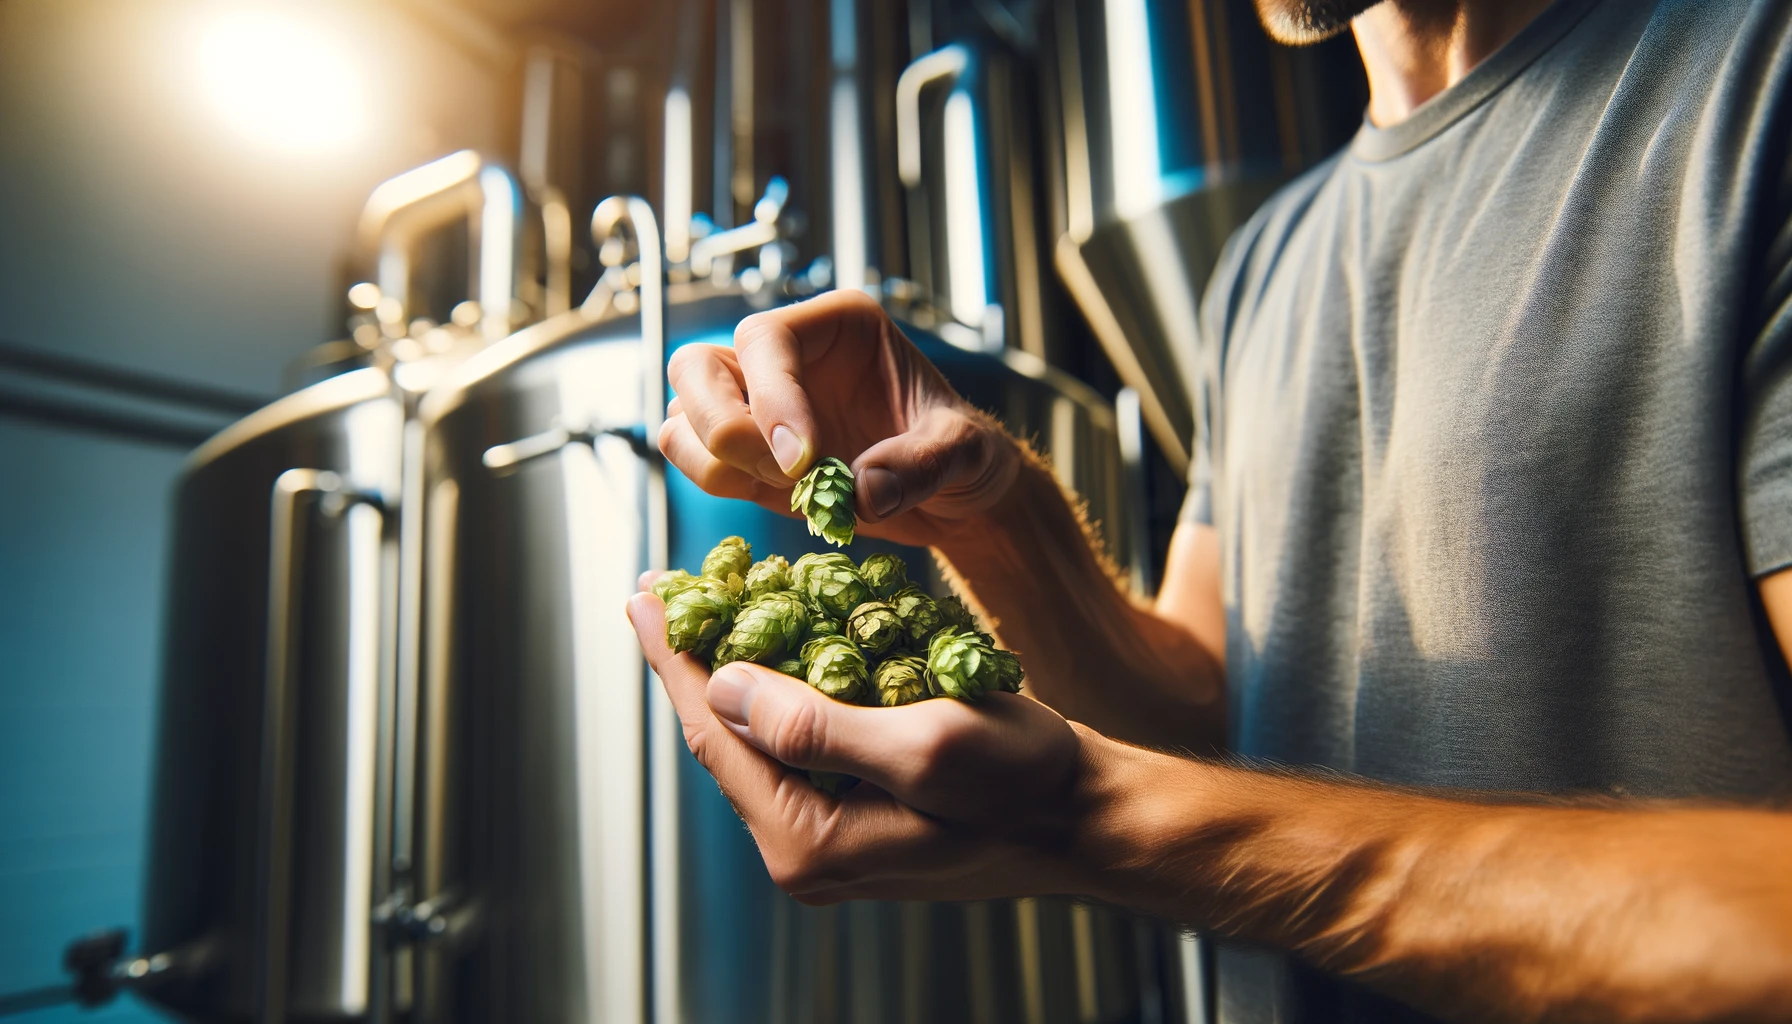 A brewer carefully examining a sample of hops with stainless steel fermentation tanks in the background. The focus is on the brewer's hands and the hops